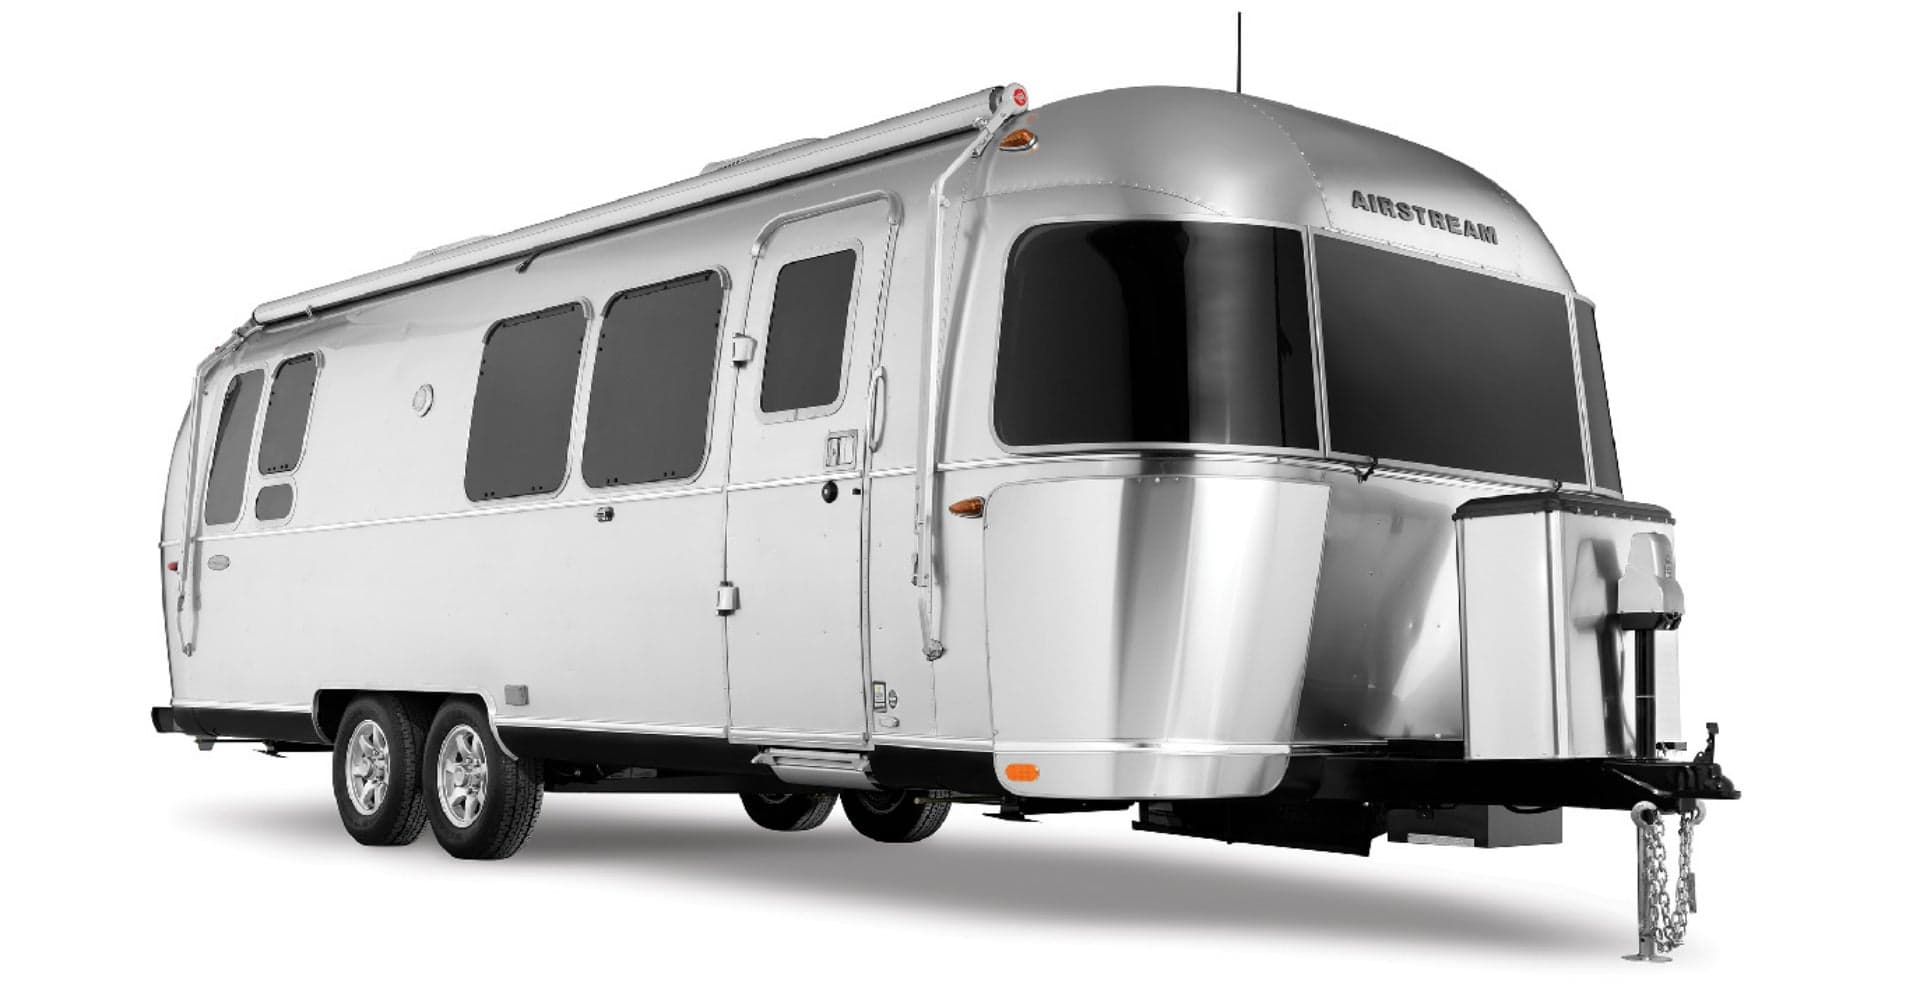 RV Sales Are on a Roll